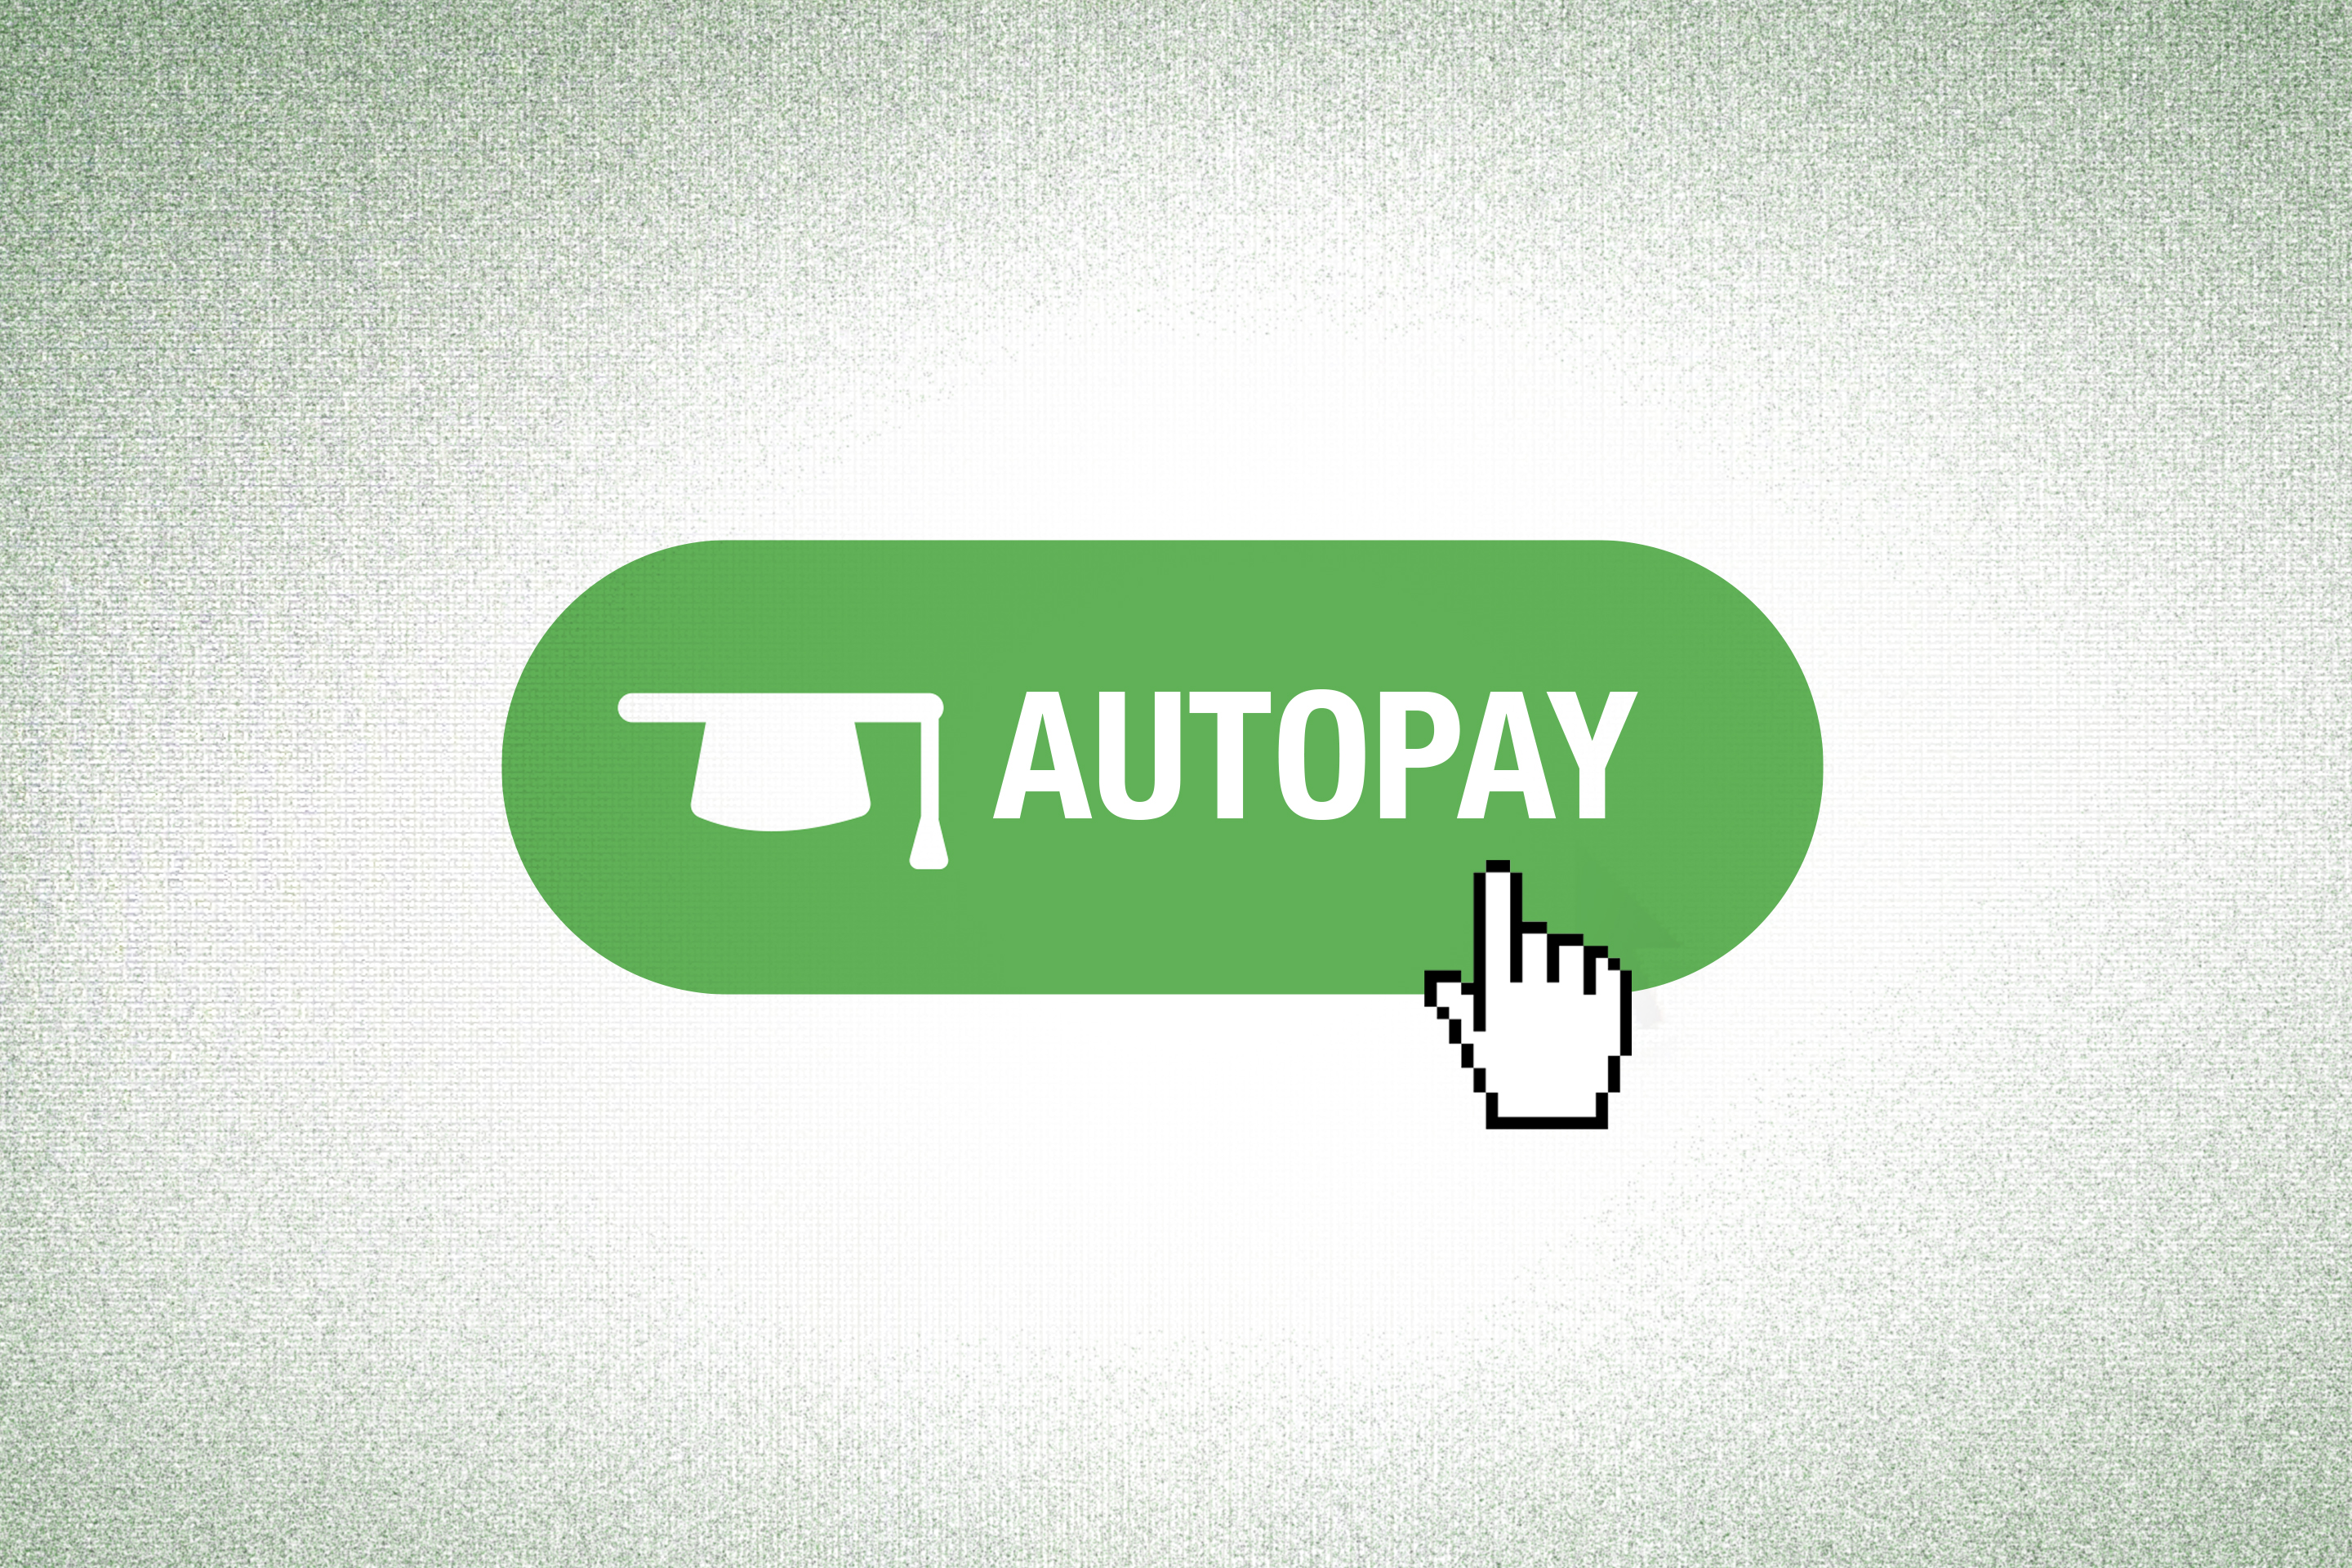 Here's Why You Should Consider Enrolling in Autopay Before Student Loan Payments Resume